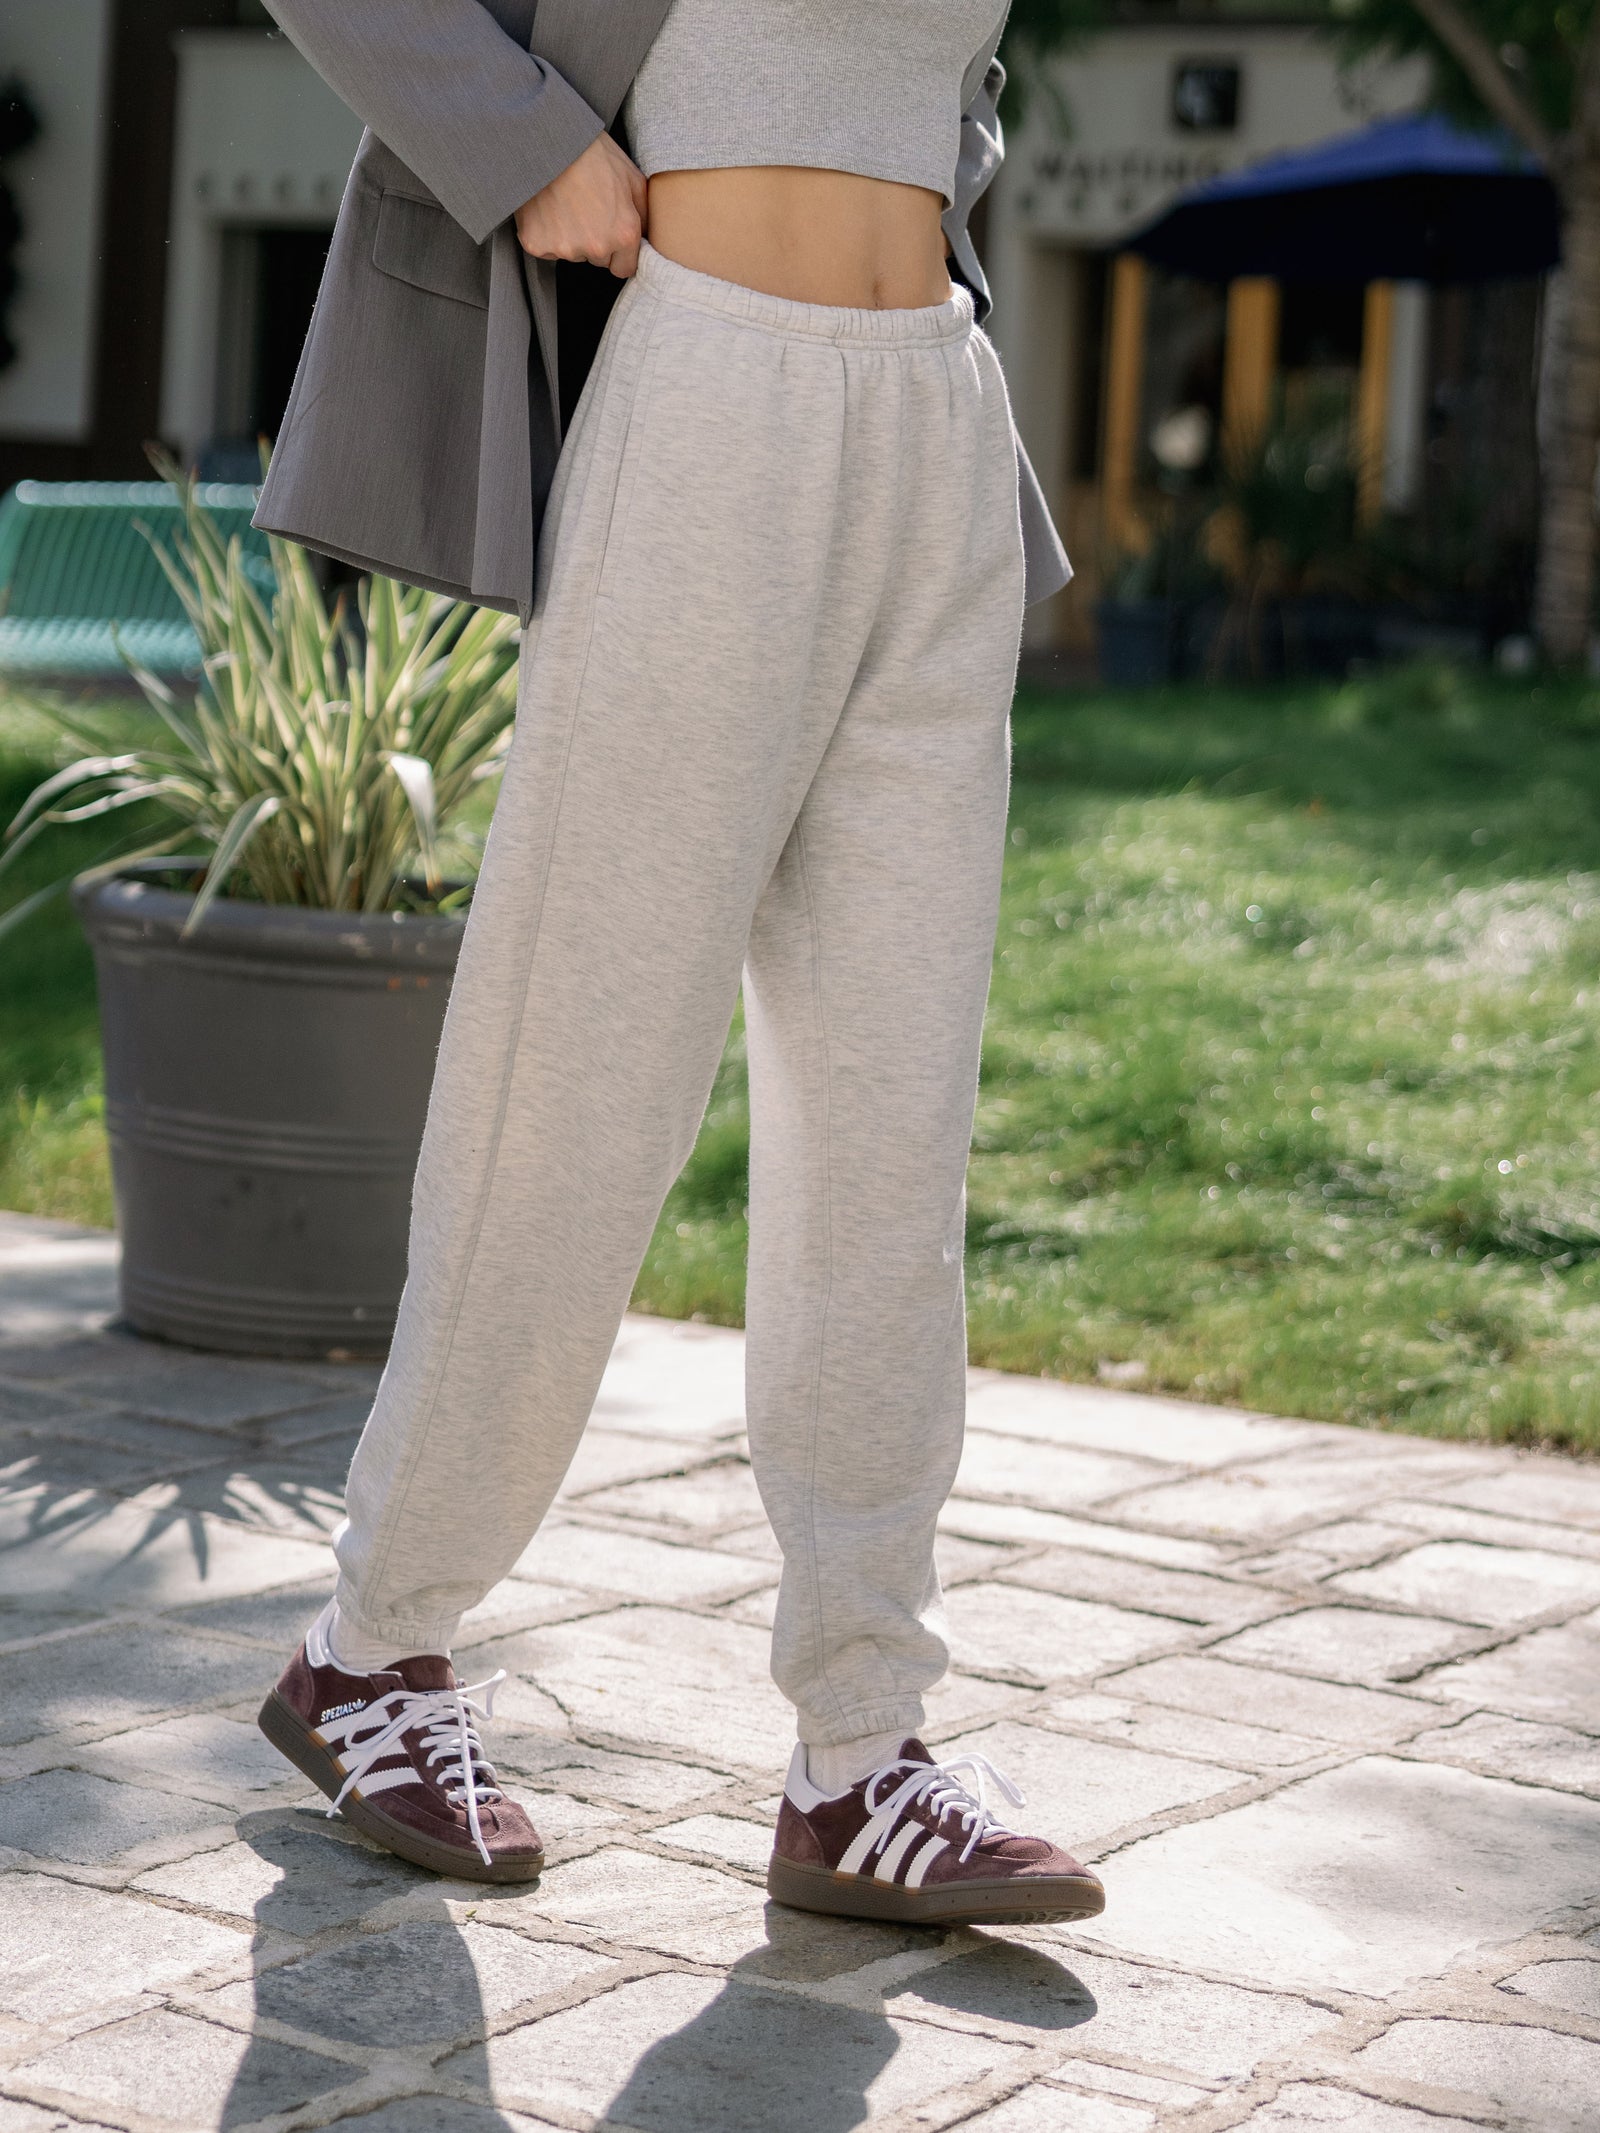 Heather Grey CityScape Joggers. The Joggers are being worn by a female model. The photo is taken from the waist down with the models hand by the pocket of the joggers. The back ground is the back yard of a home. 